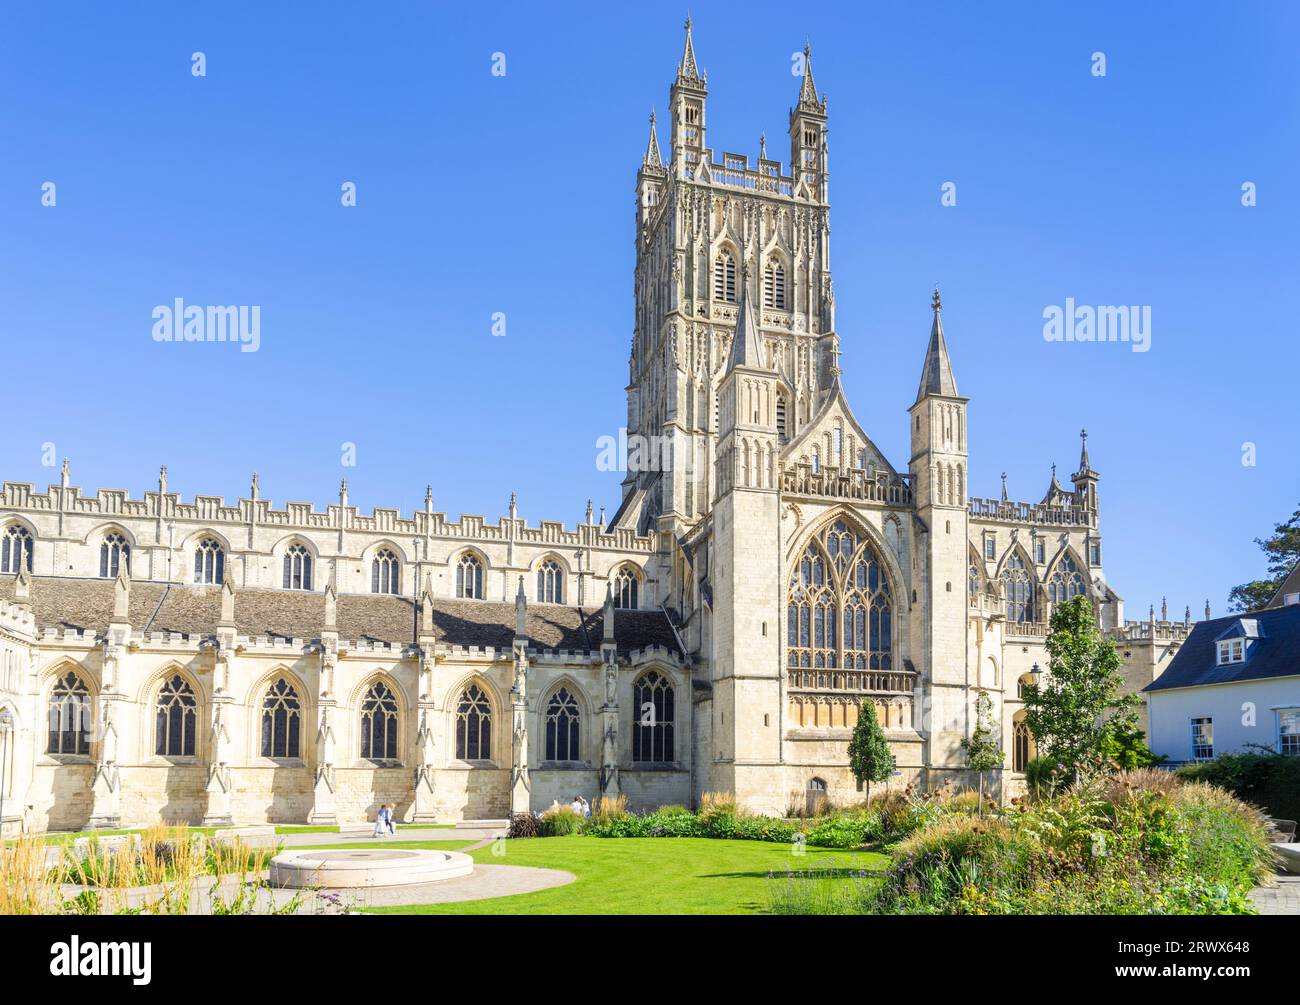 Gloucester Cathedral oder Cathedral Church of St Peter and the Holy and Unteilbare Trinity Gloucester Gloucestershire England Großbritannien Europa Stockfoto